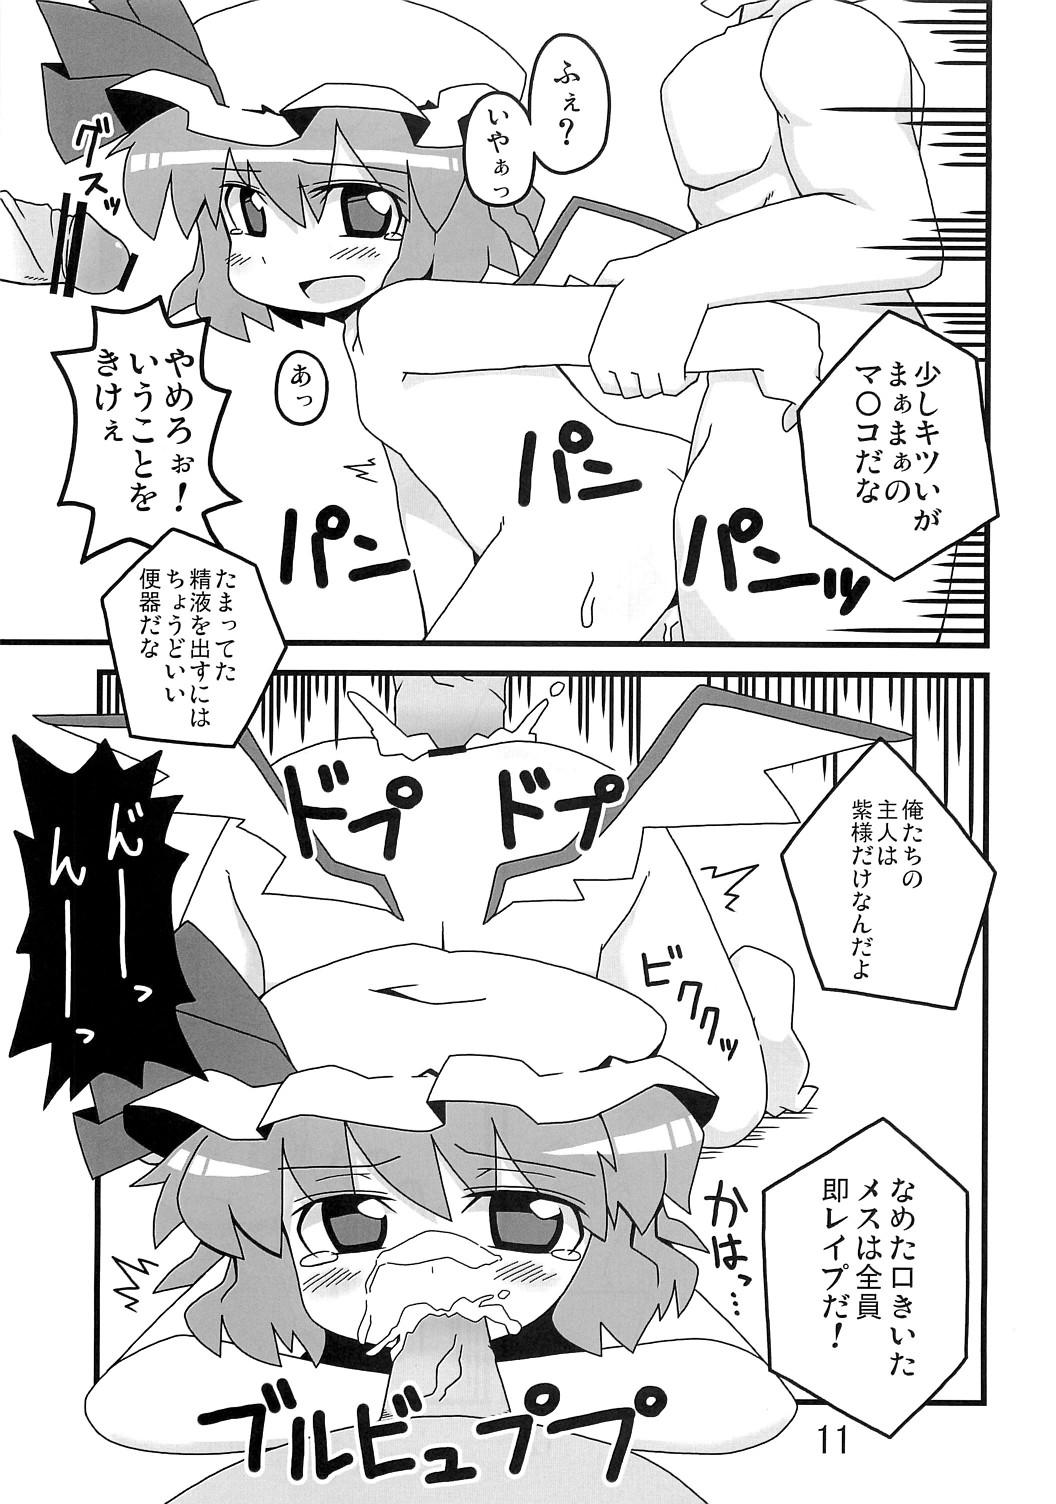 Bhabi 東方豊年祭 - Touhou project Cumfacial - Page 10